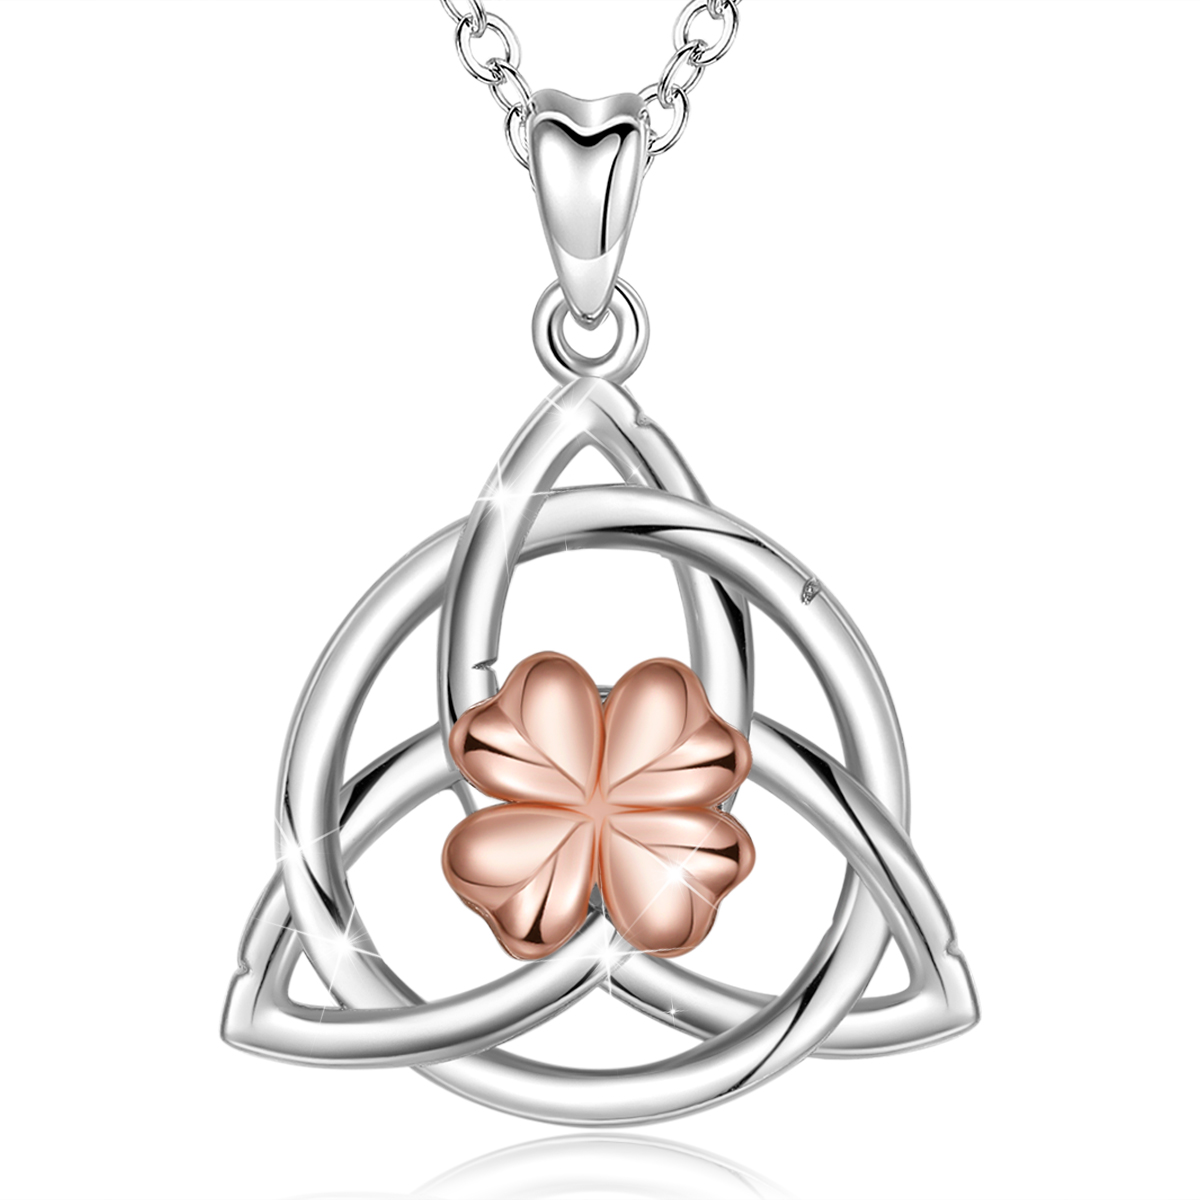 Merryshine S925 Sterling Silver Plating Rose Gold Four Leaf Clover Jewelry Pendant Necklace